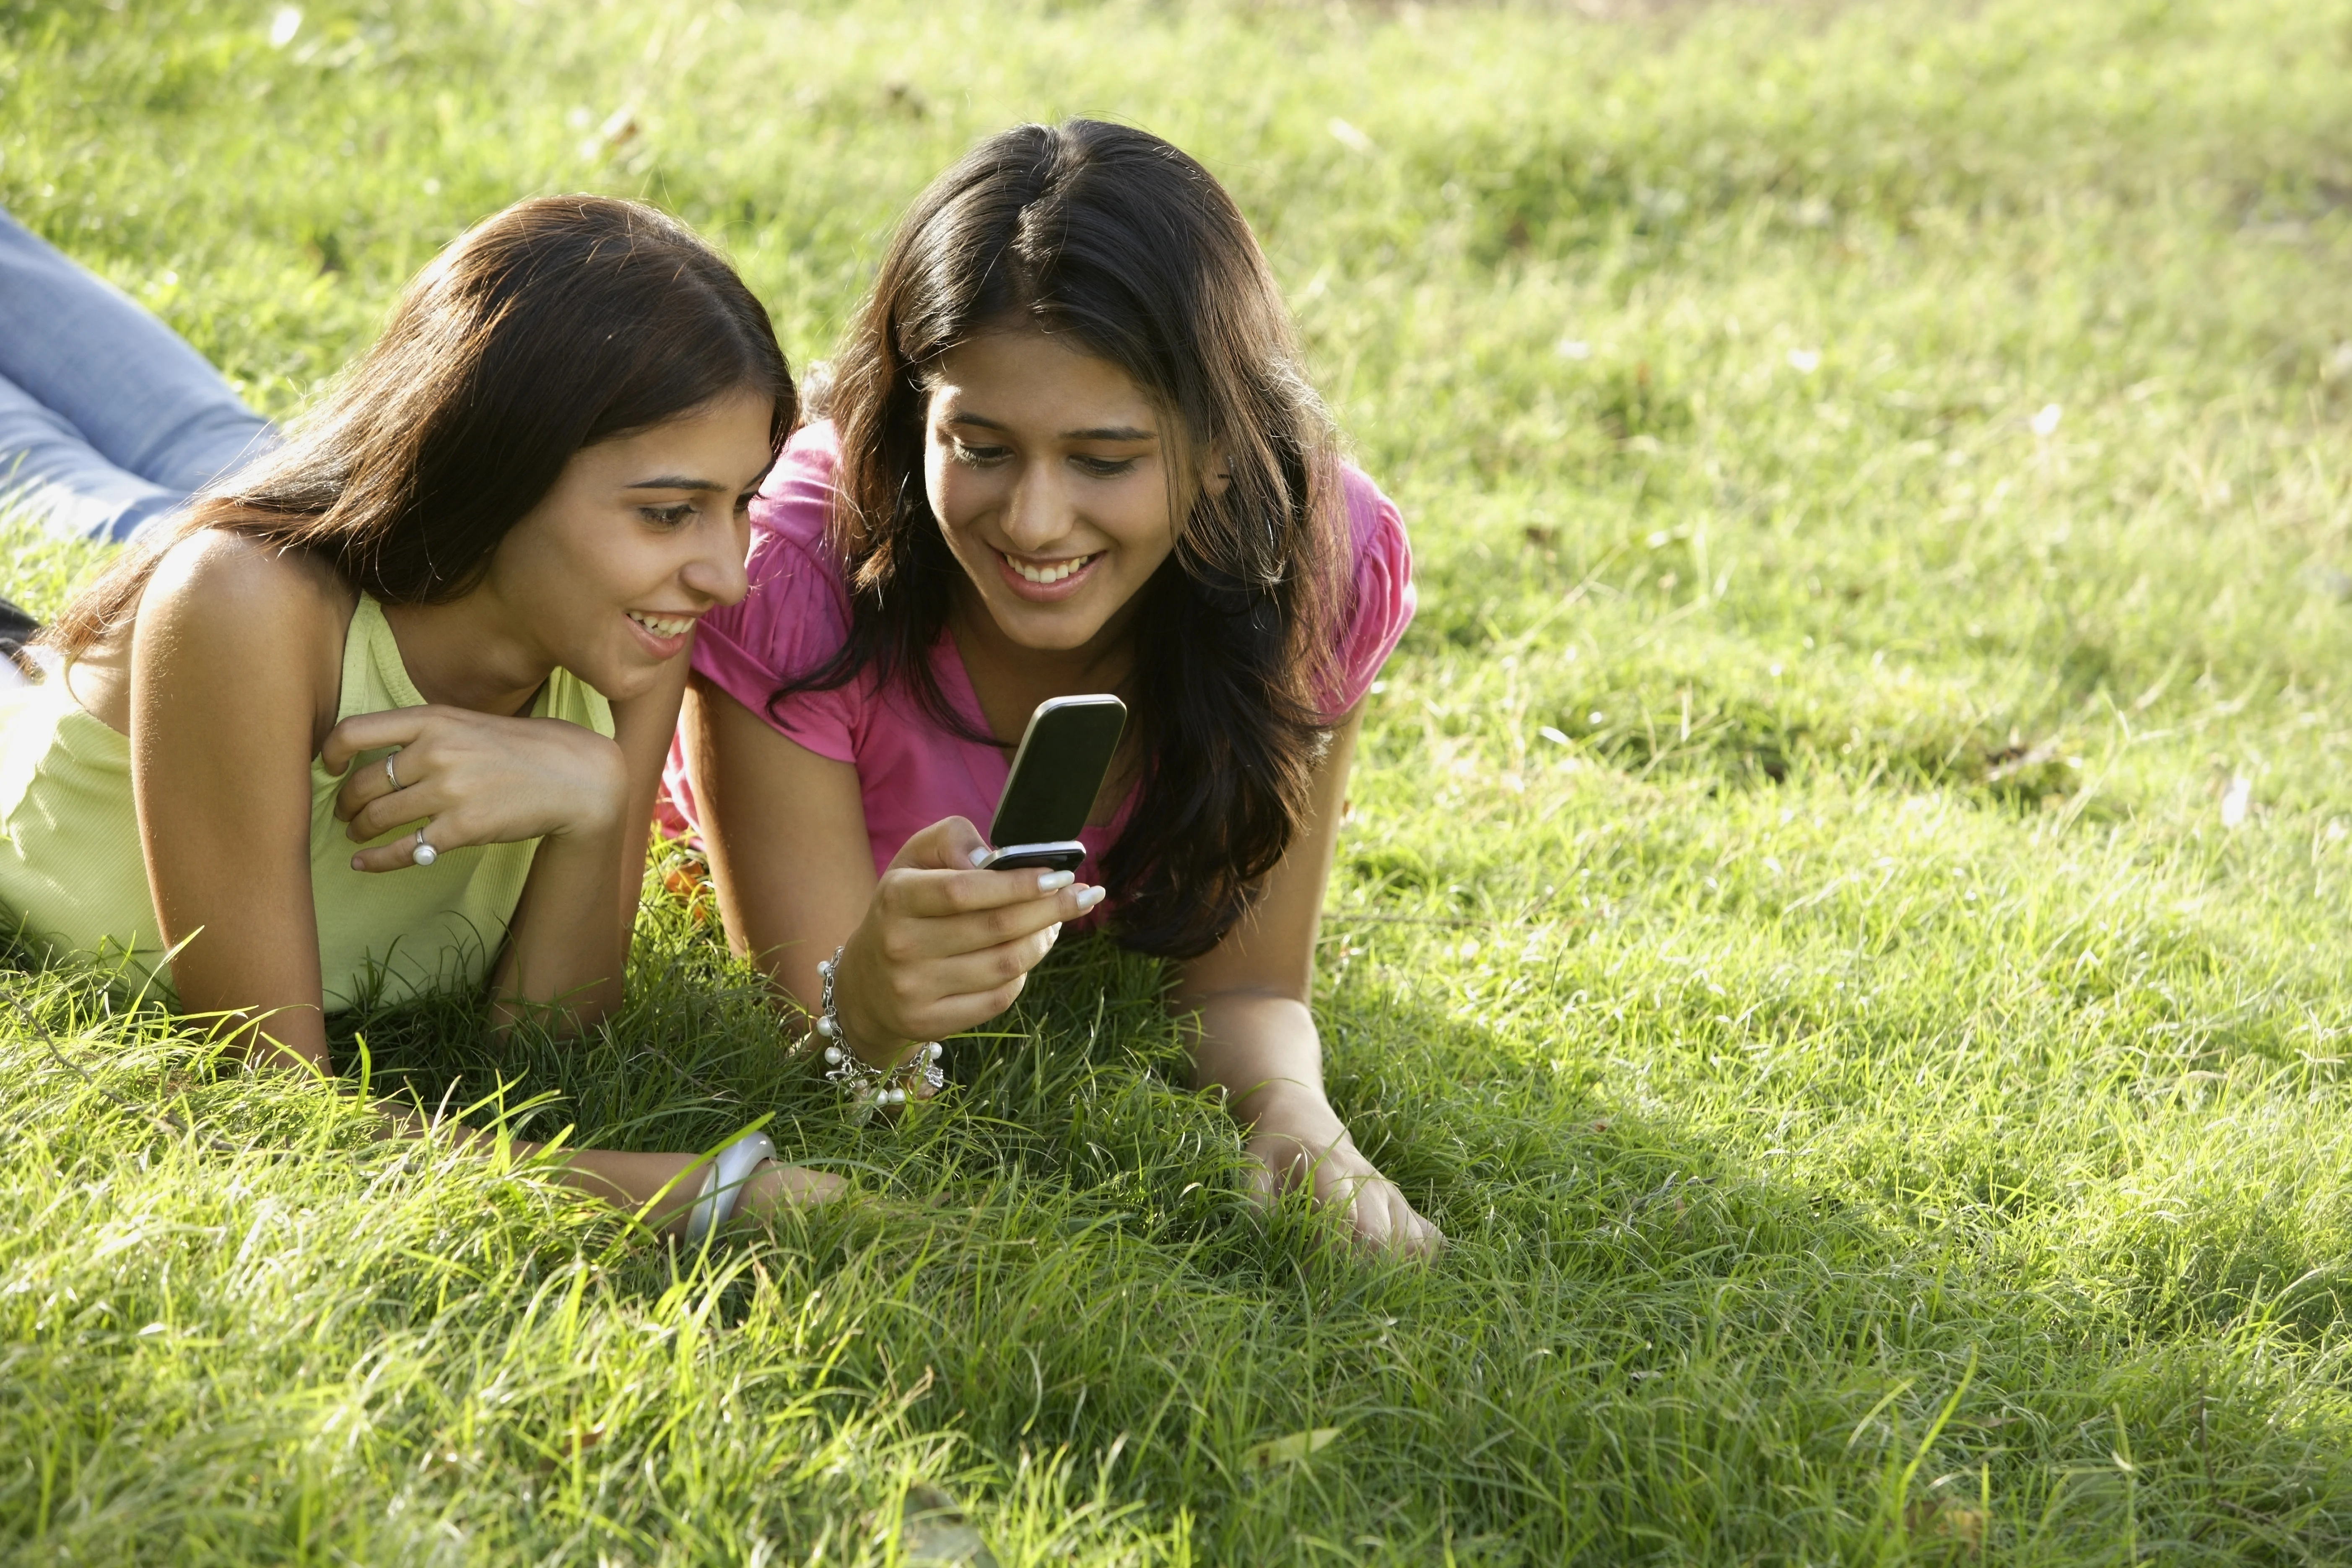 Two girls lying on grass and looking at a phone